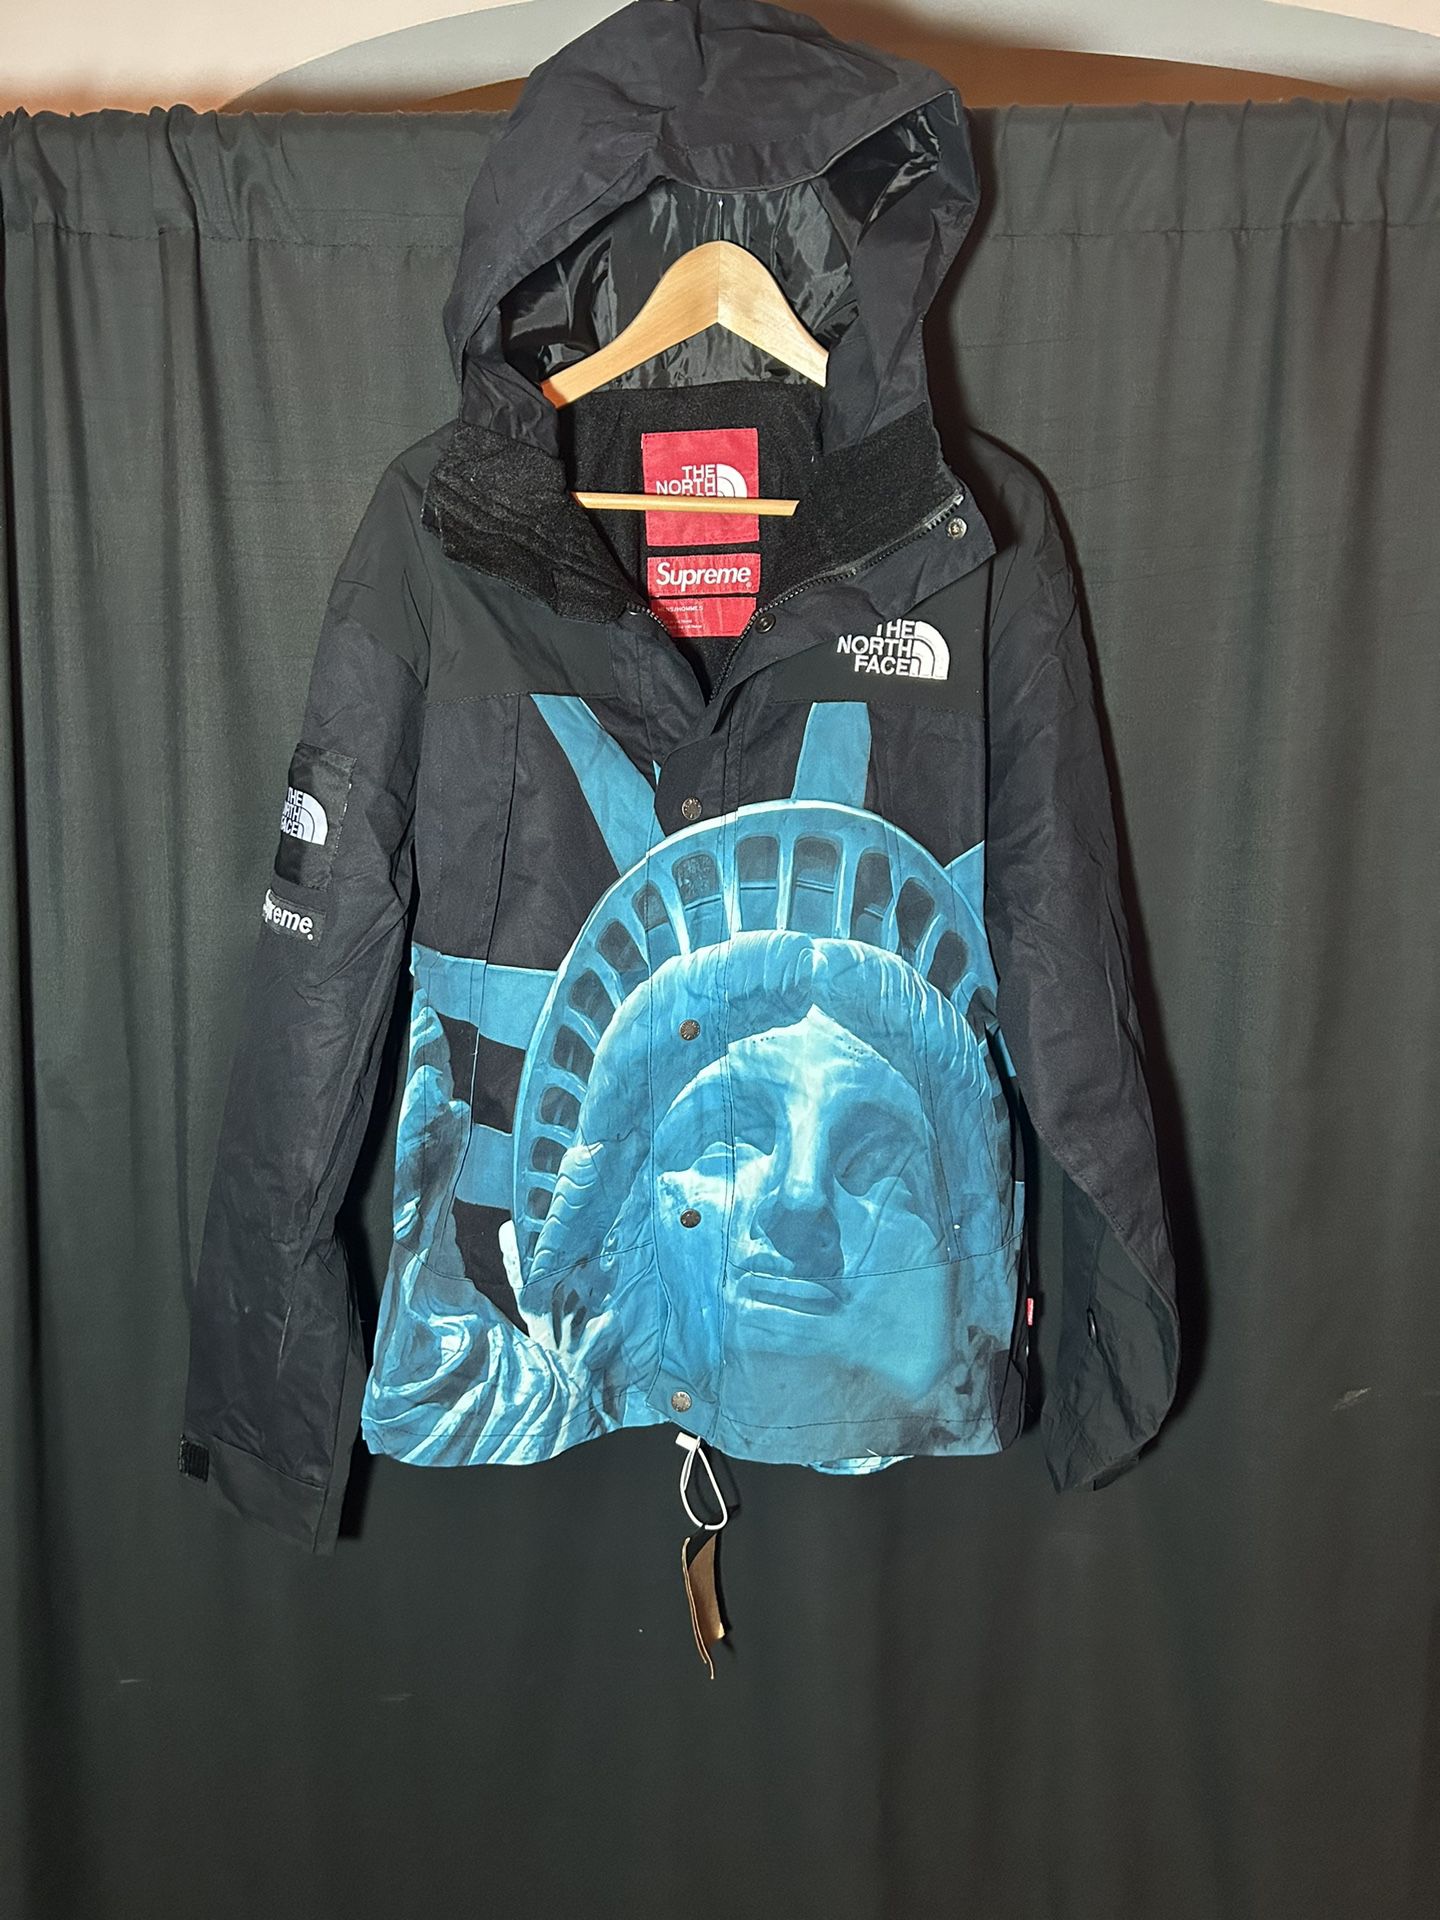 The North Face / Supreme Jacket Size M